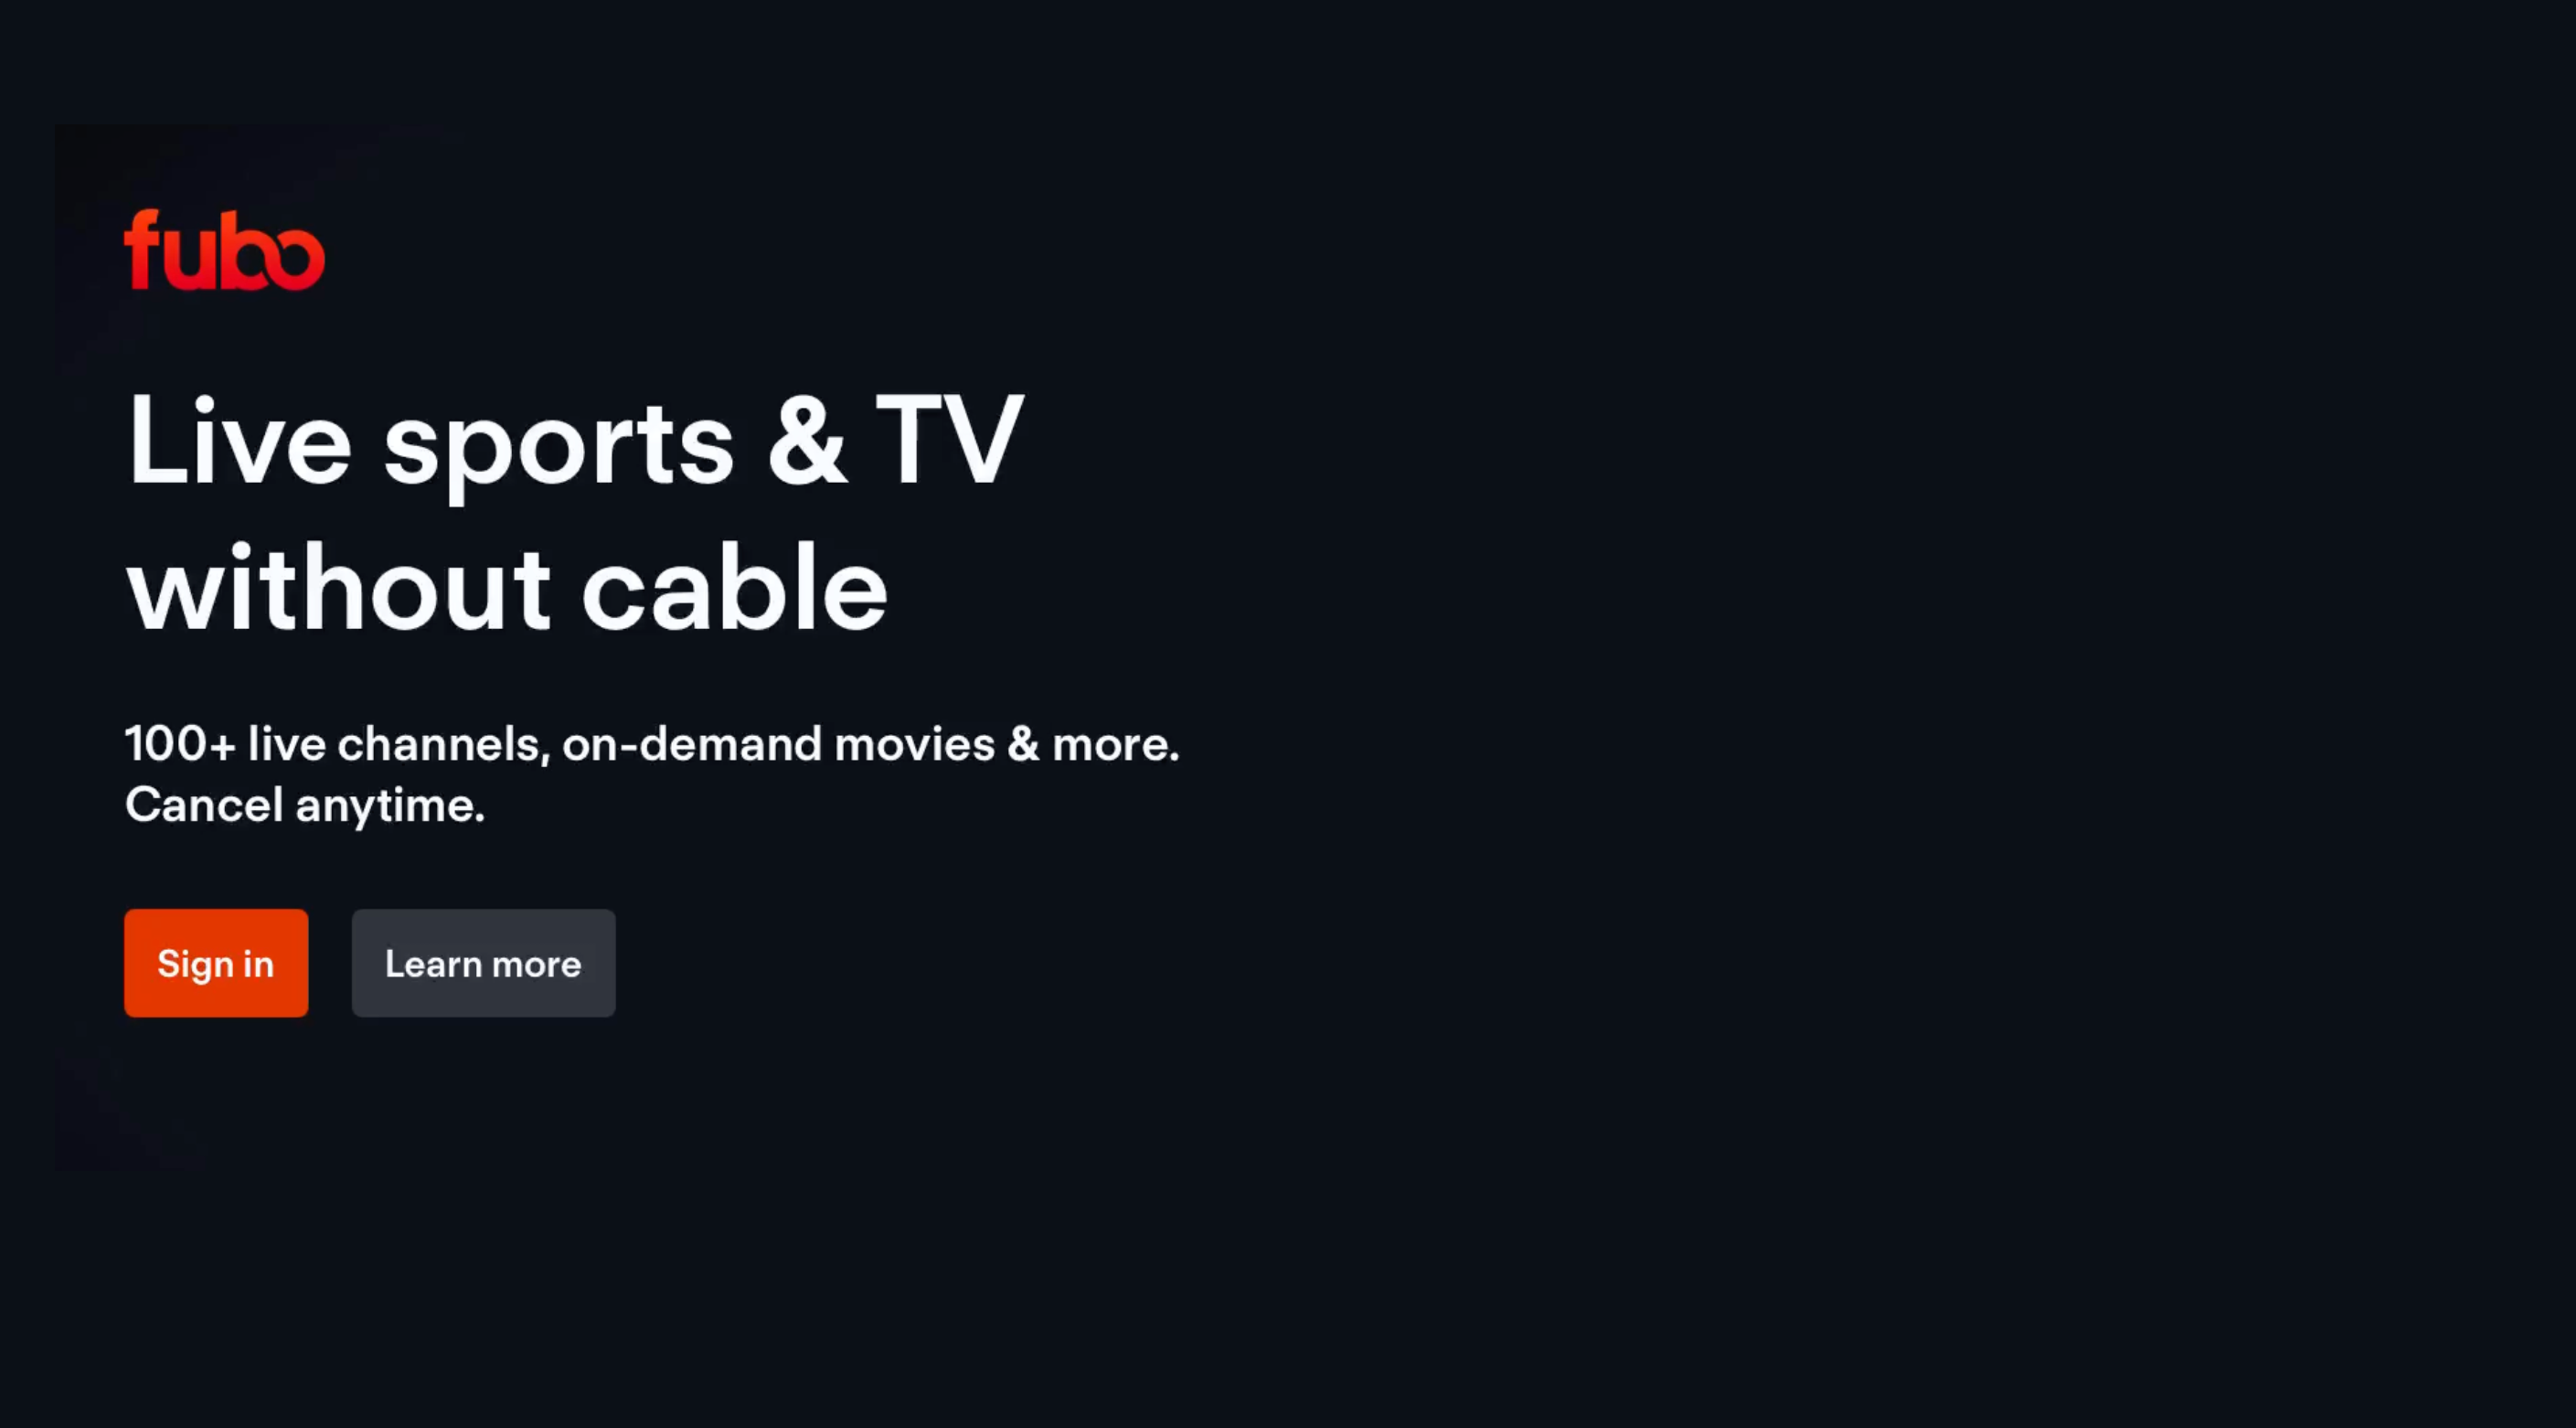 Sign in screen for the FuboTV app on Apple TV, with options to sign in or get signup information